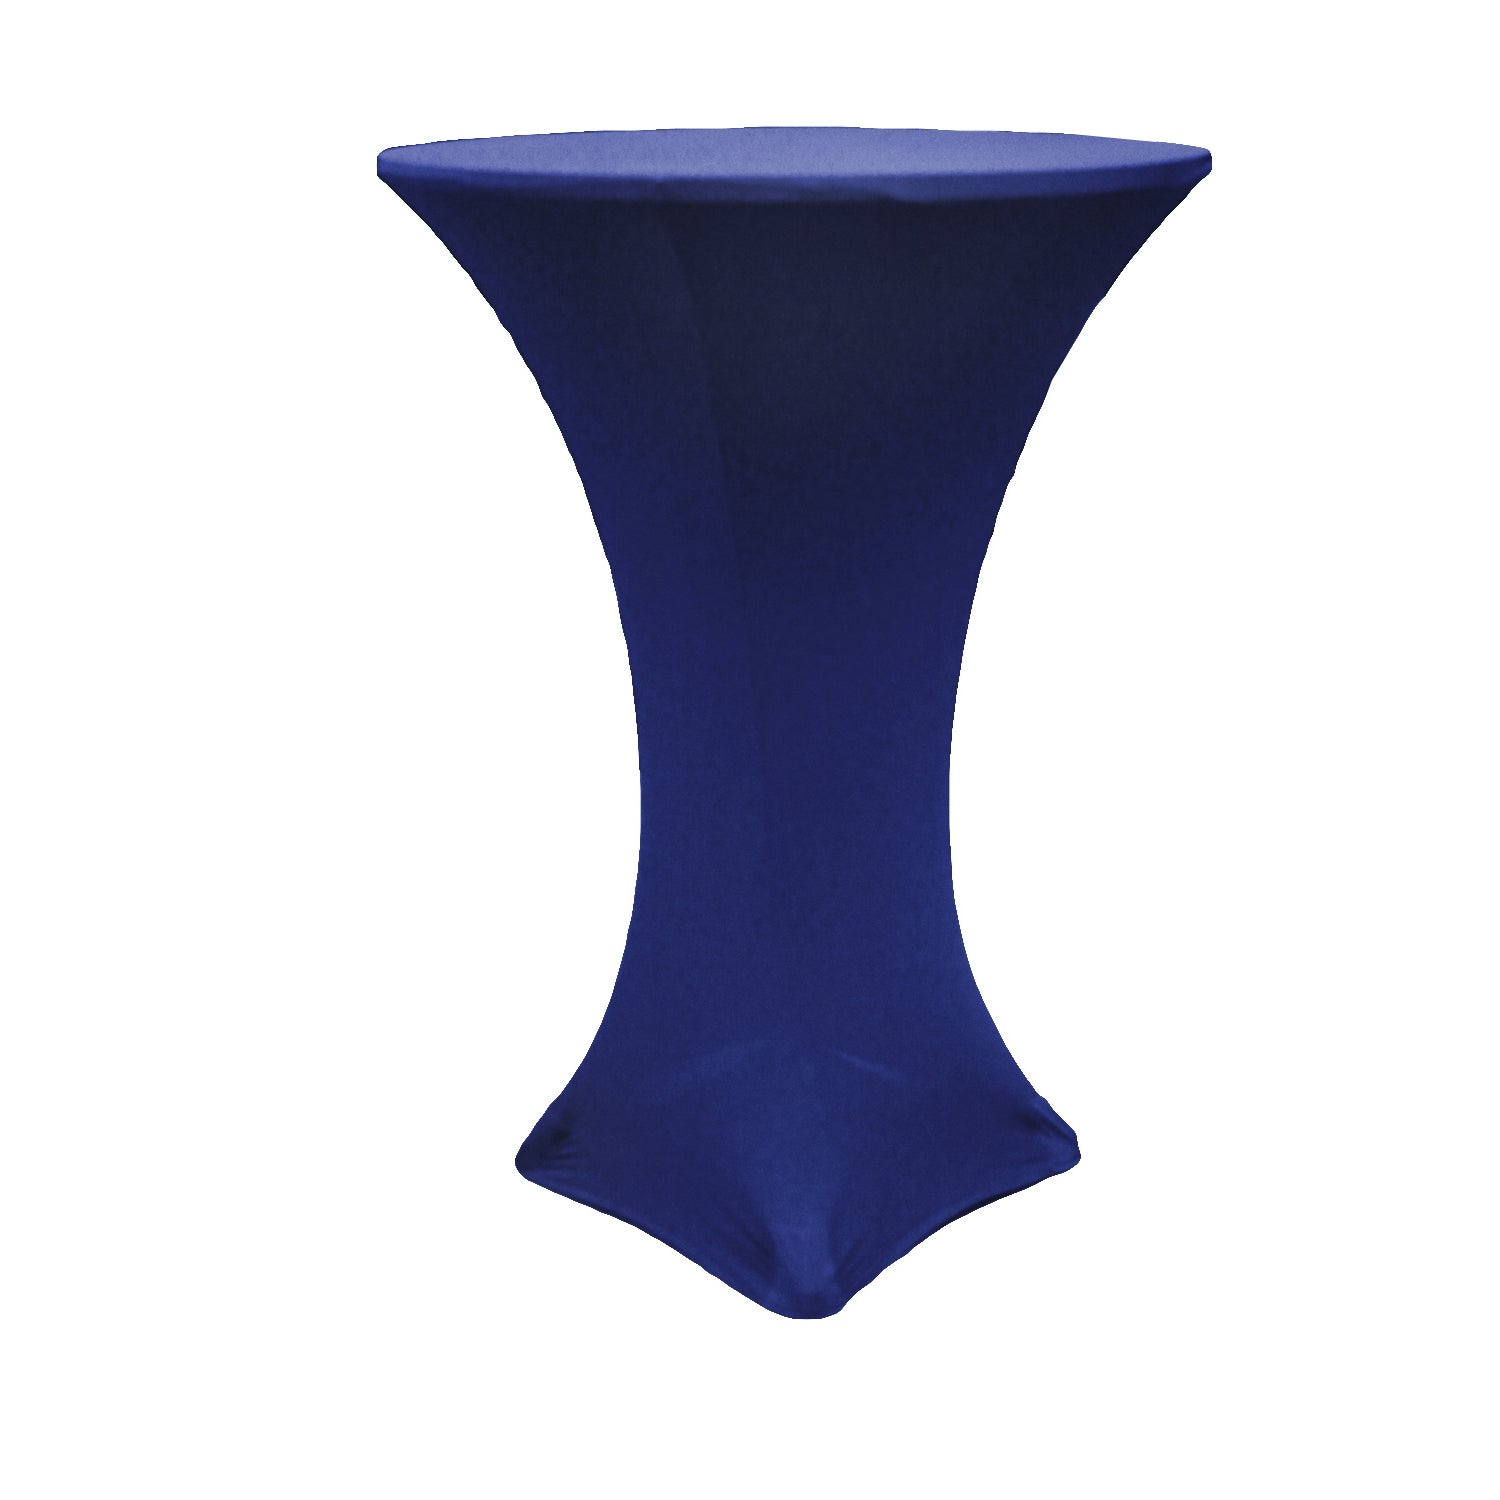 Spandex Cocktail Table Cover 30" Round - Navy Blue - CV Linens